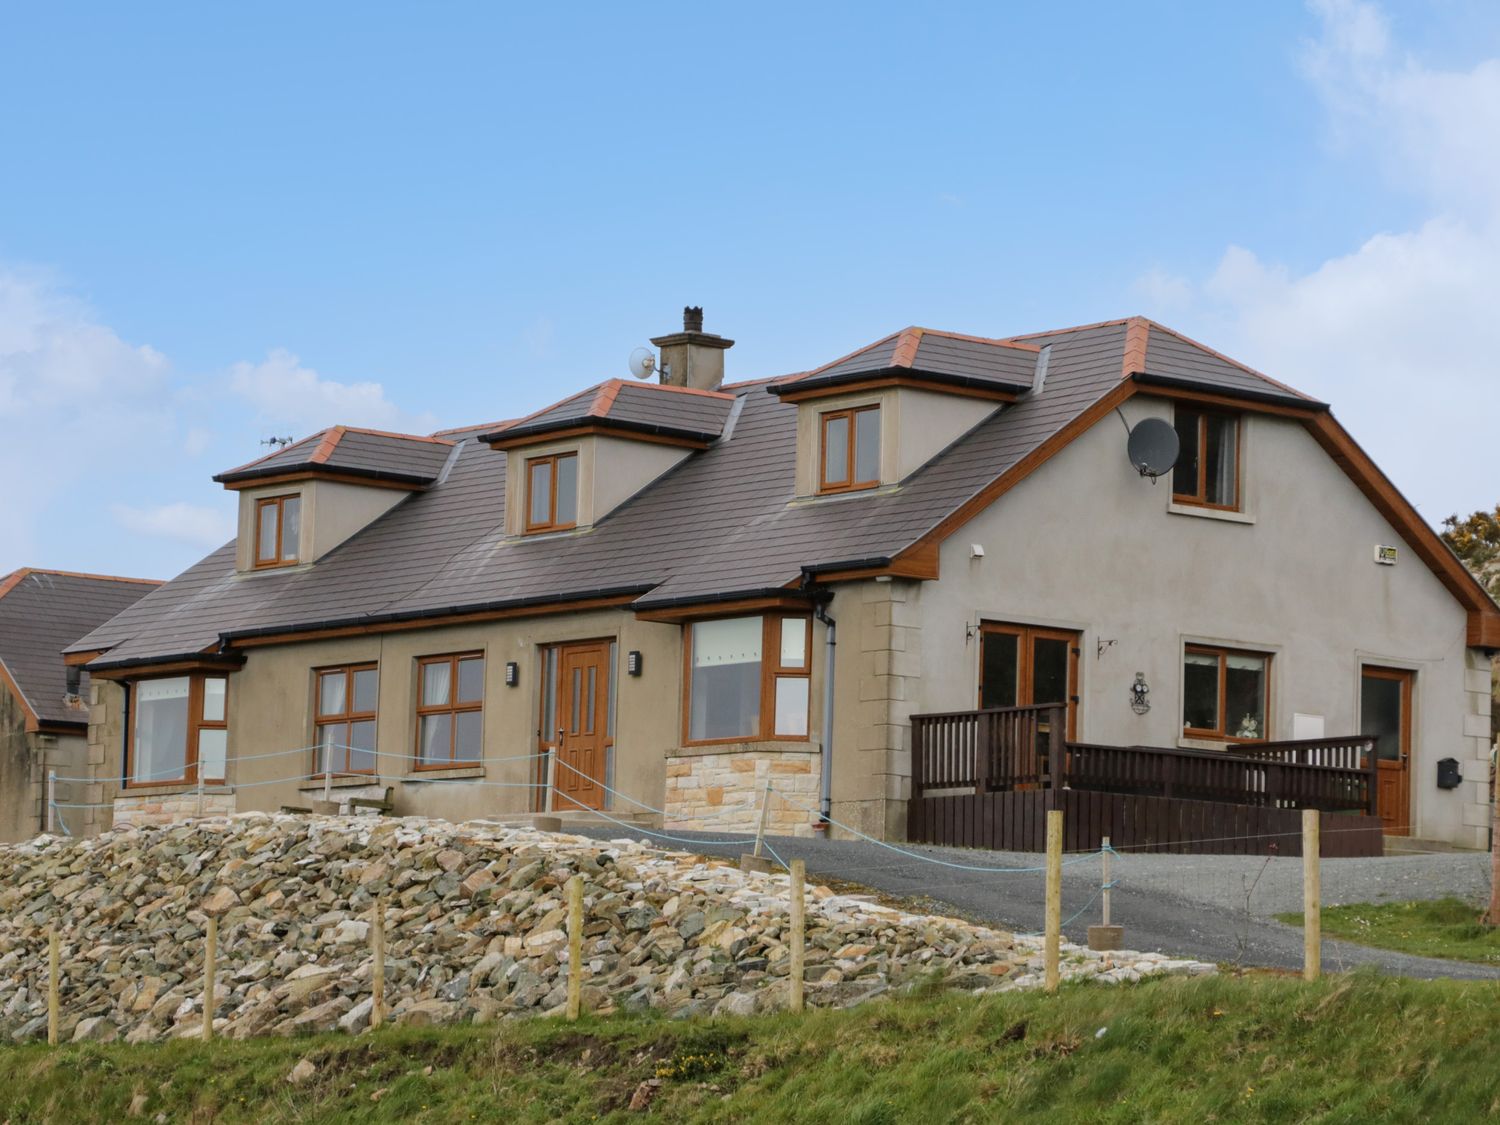 House on Ring Fort Hill - County Donegal - 1154489 - photo 1